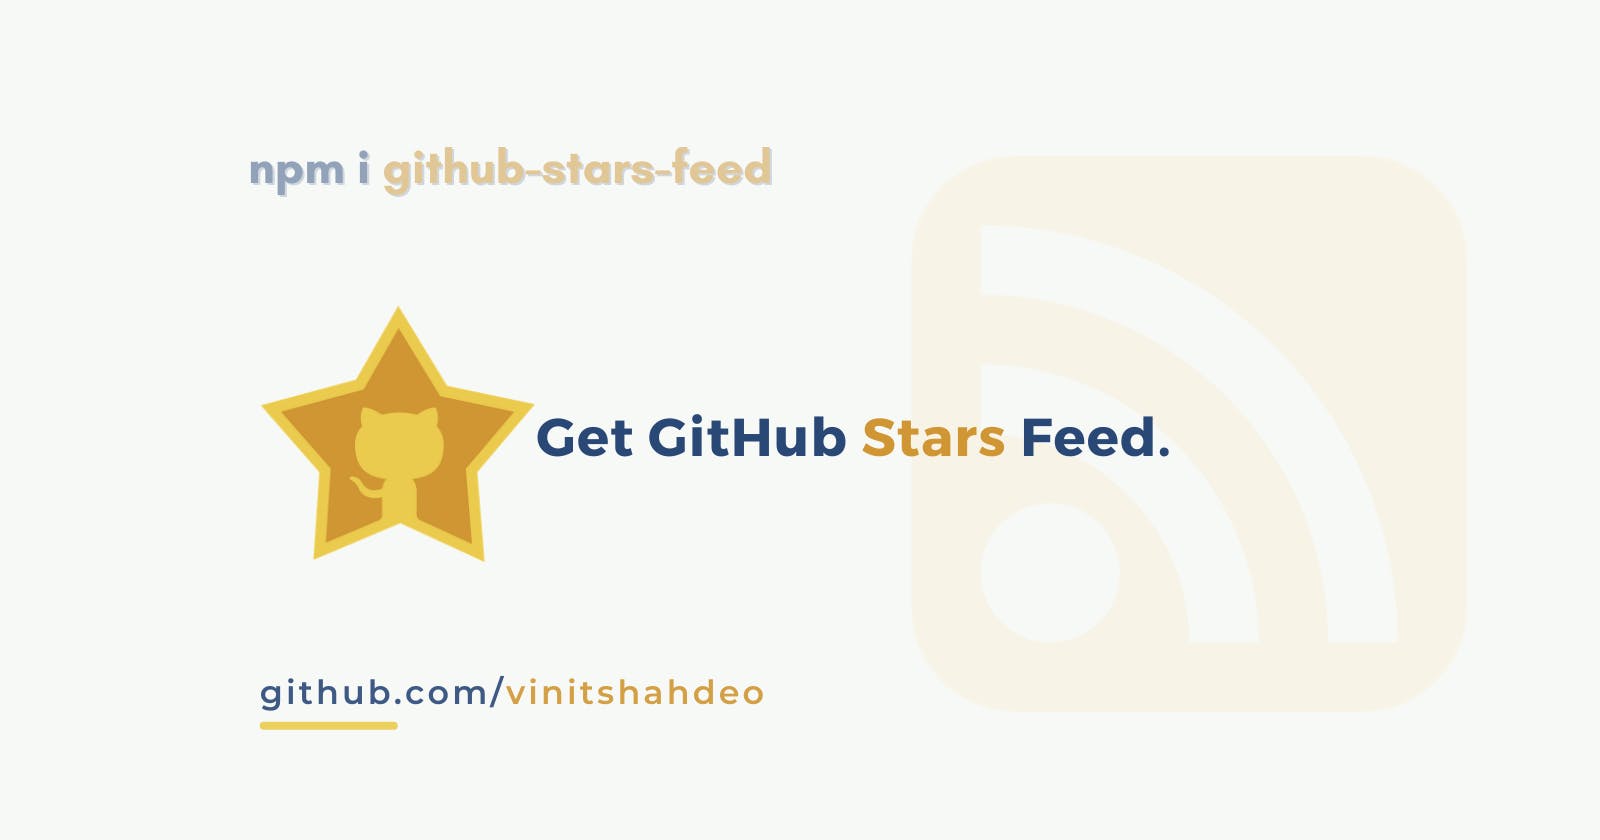 How to get GitHub Stars Contributions